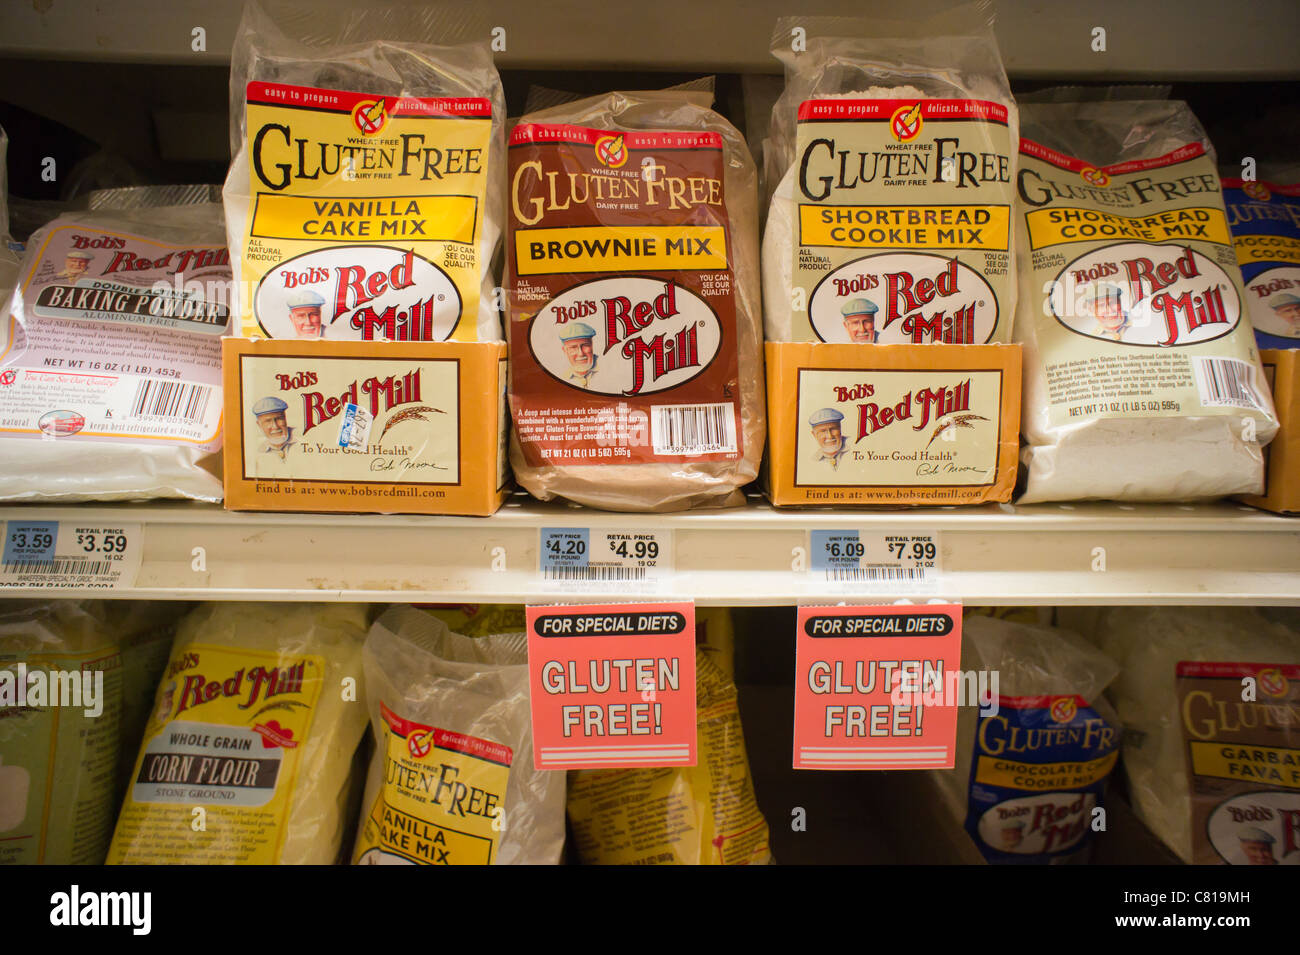 Packages of gluten-free baking products are seen on a a supermarket shelf in New York Stock Photo